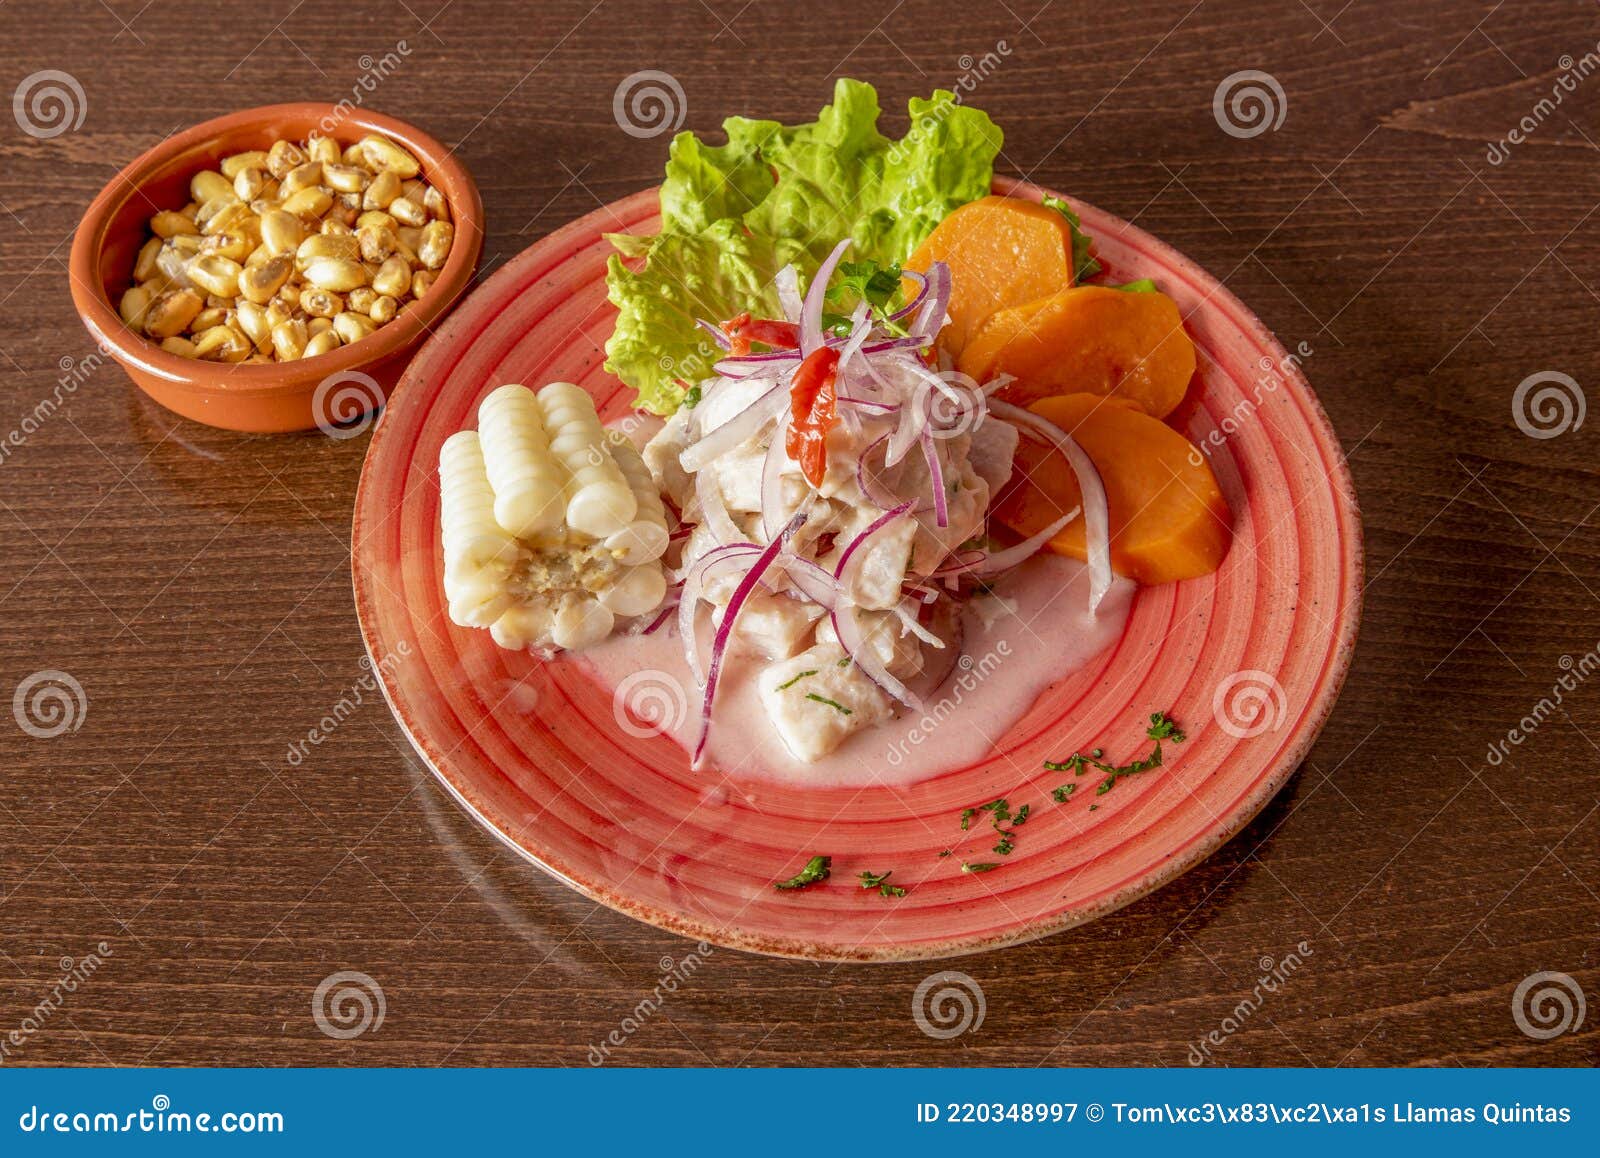 nice red plate with peruvian-style fish ceviche with white corn, cancha and sweet potato slices